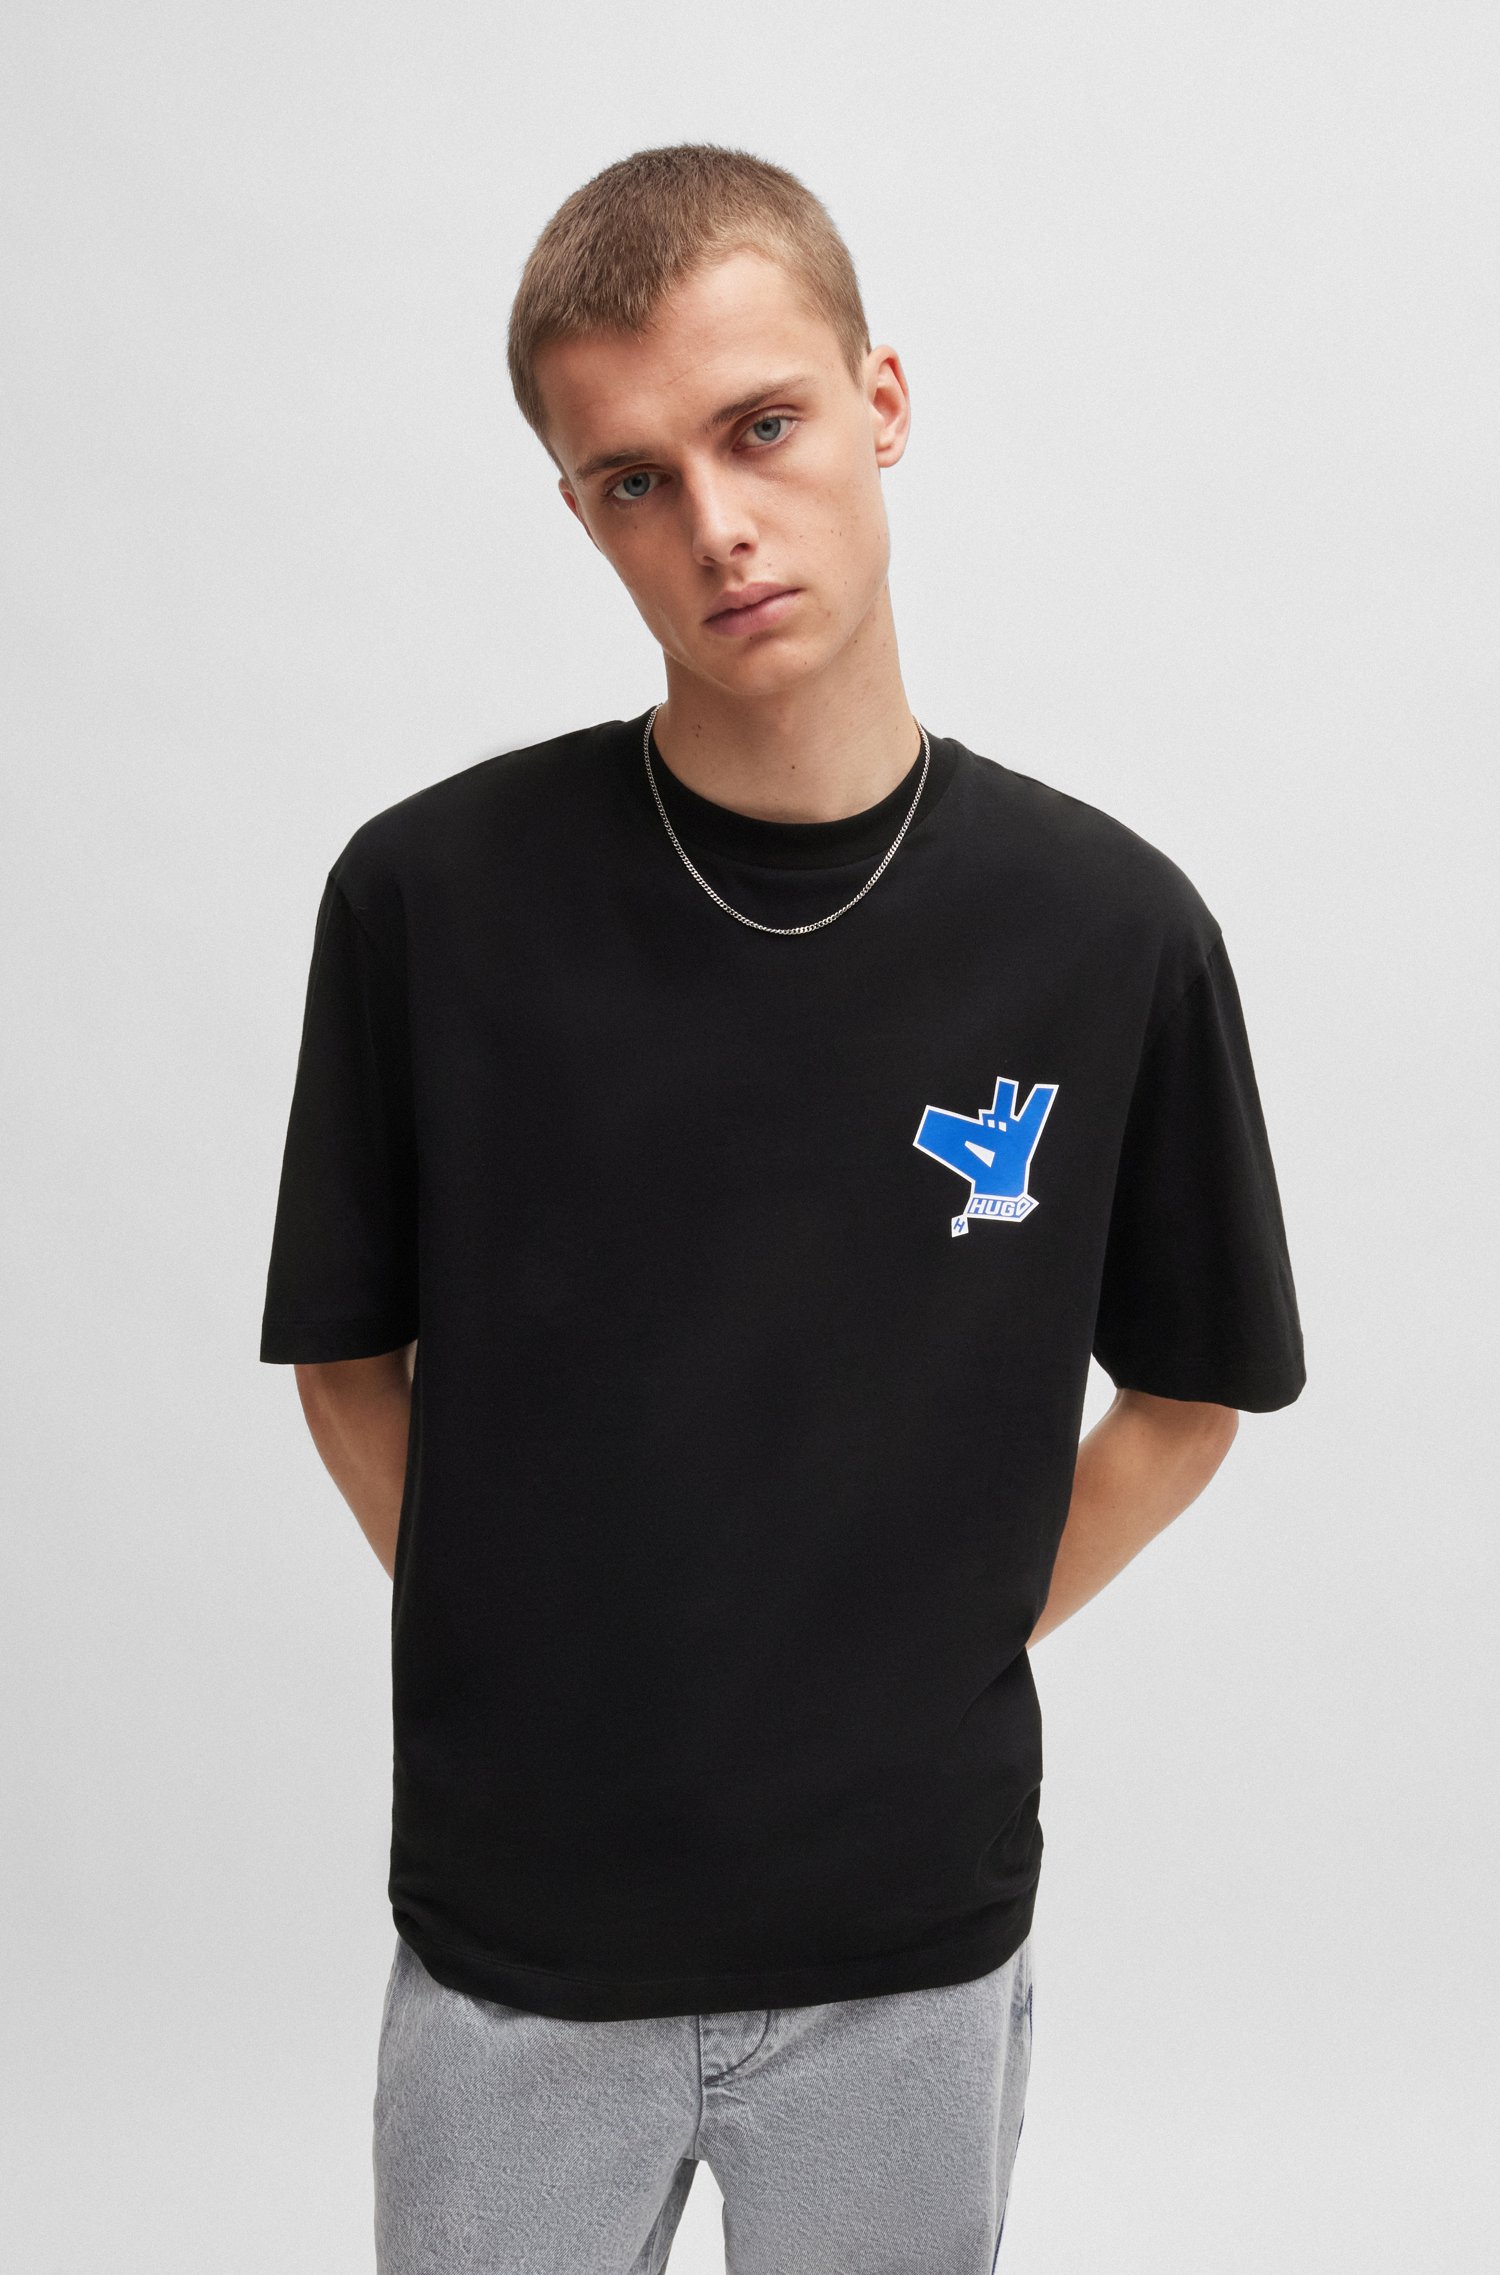 Cotton-jersey T-shirt with seasonal logo and crew neck